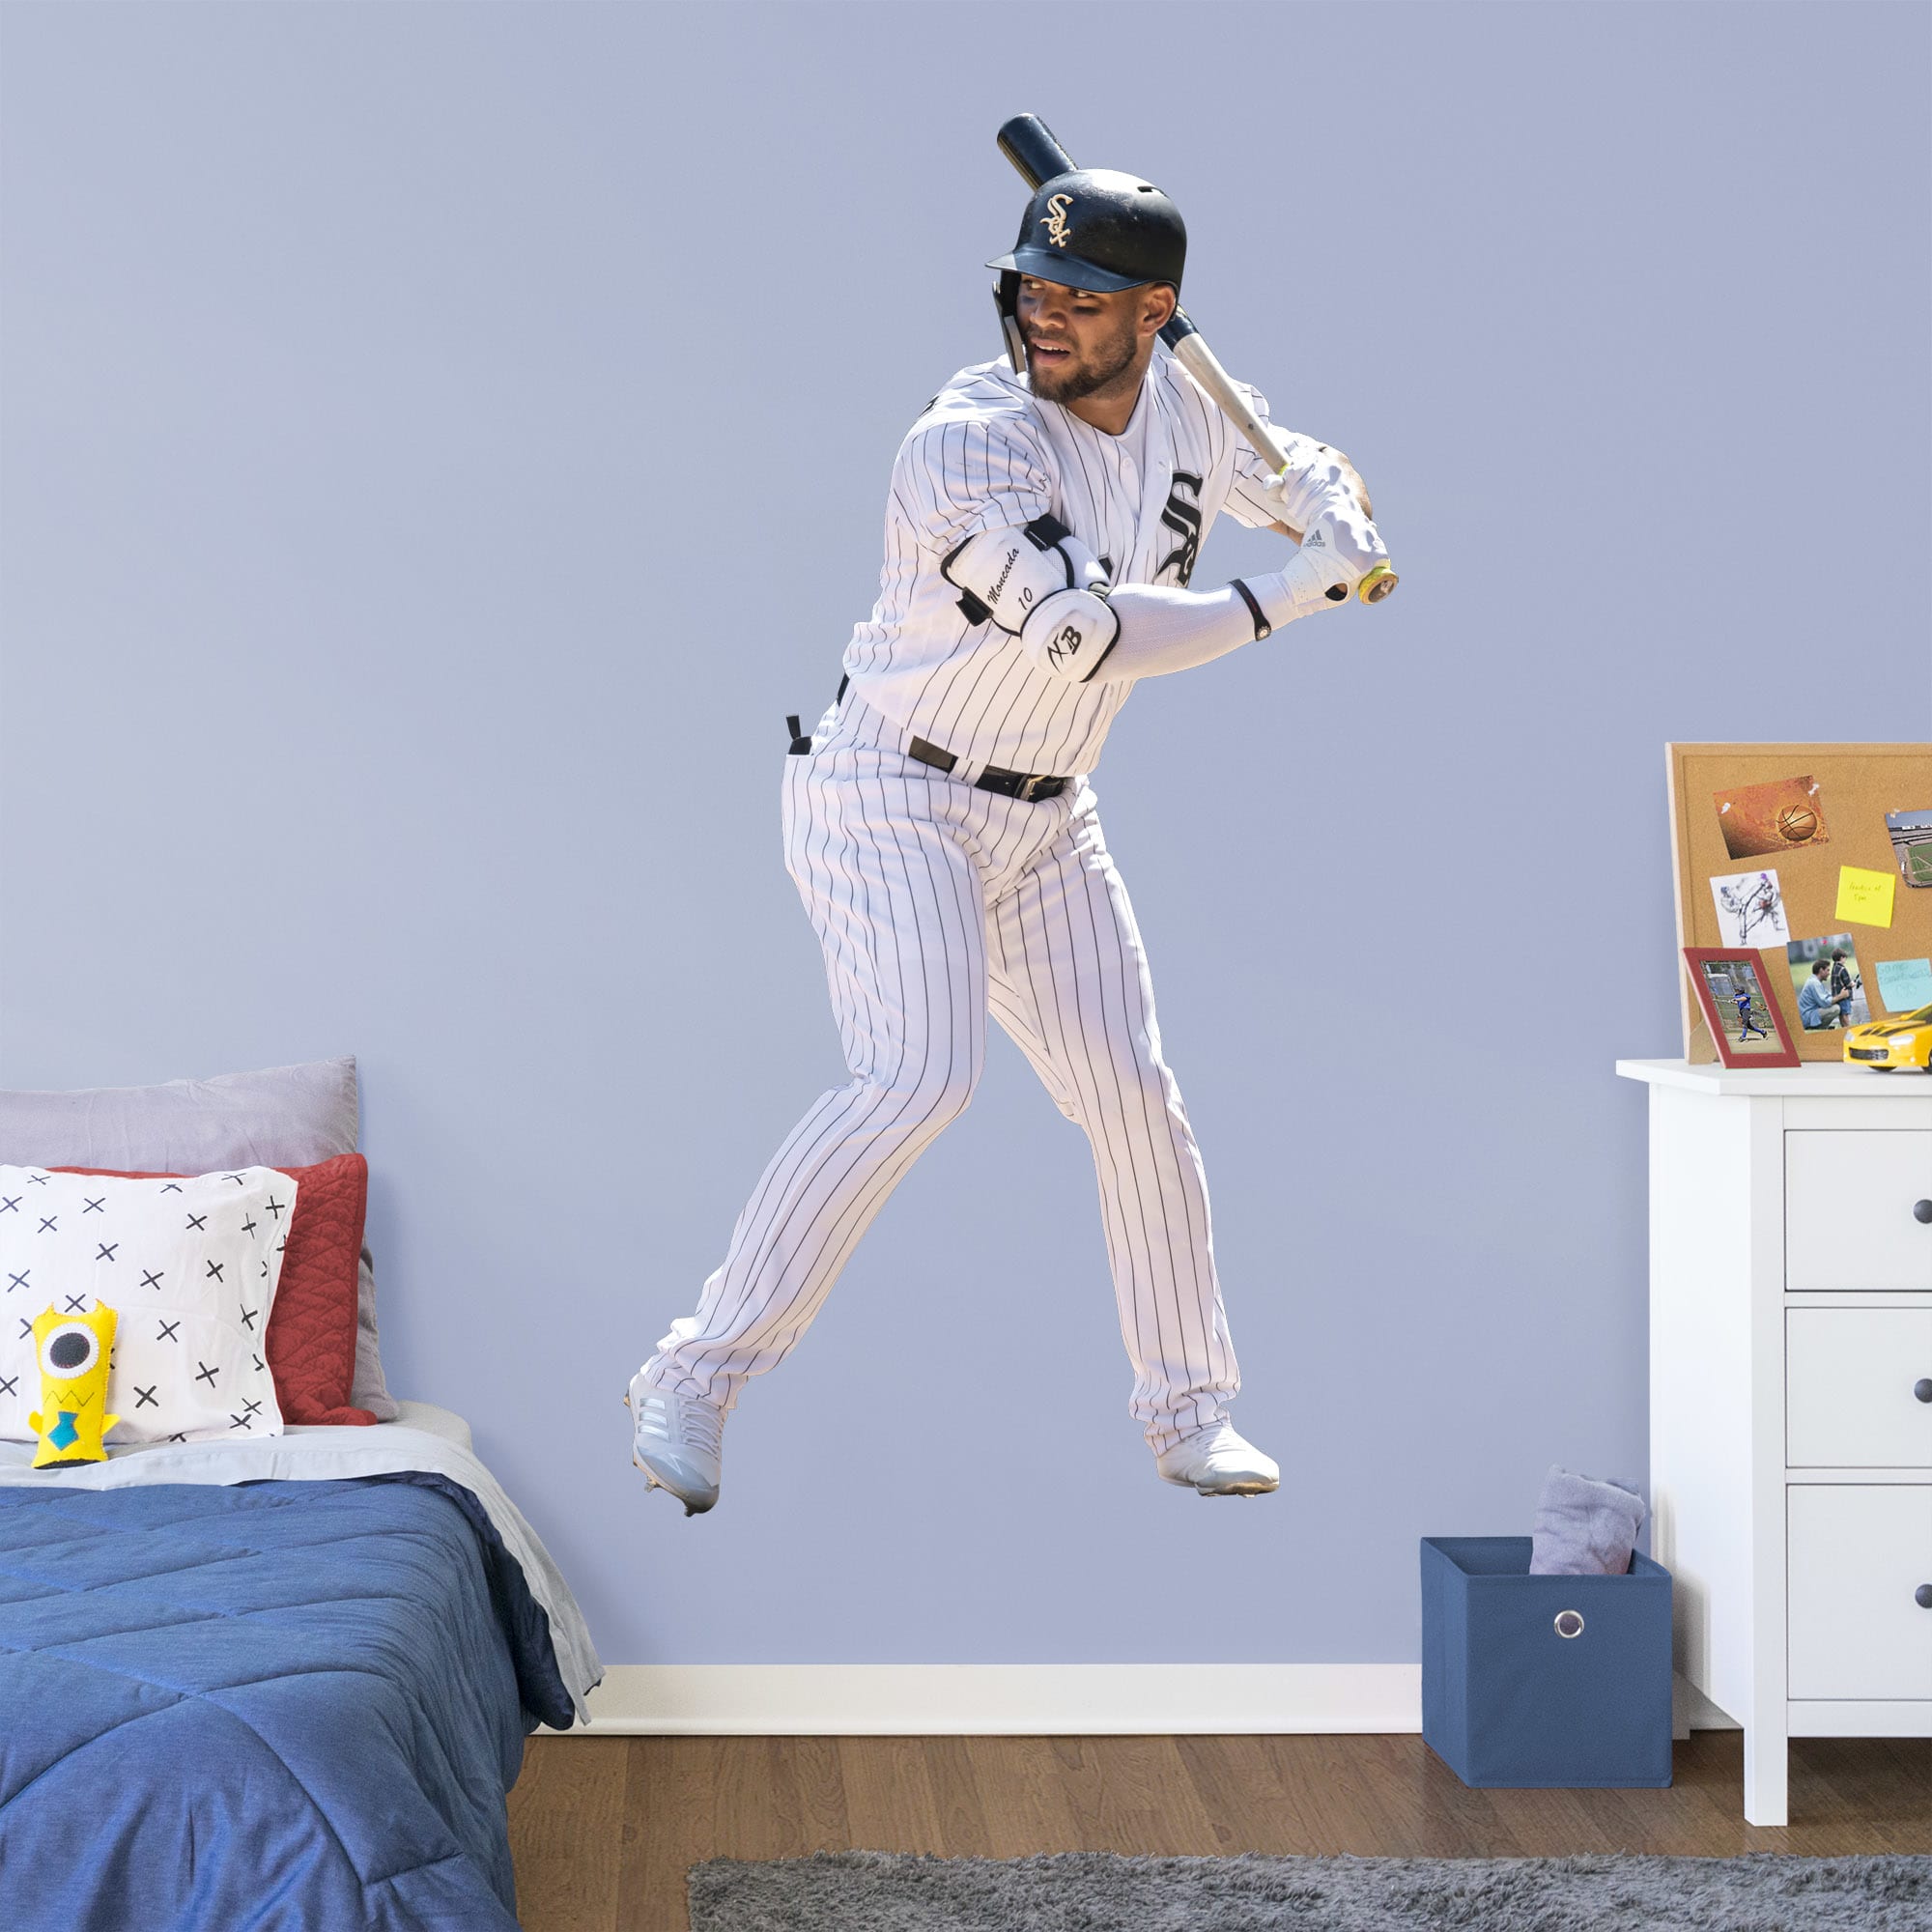 Yoan Moncada for Chicago White Sox - Officially Licensed MLB Removable Wall Decal Life-Size Athlete + 2 Decals (43"W x 78"H) by